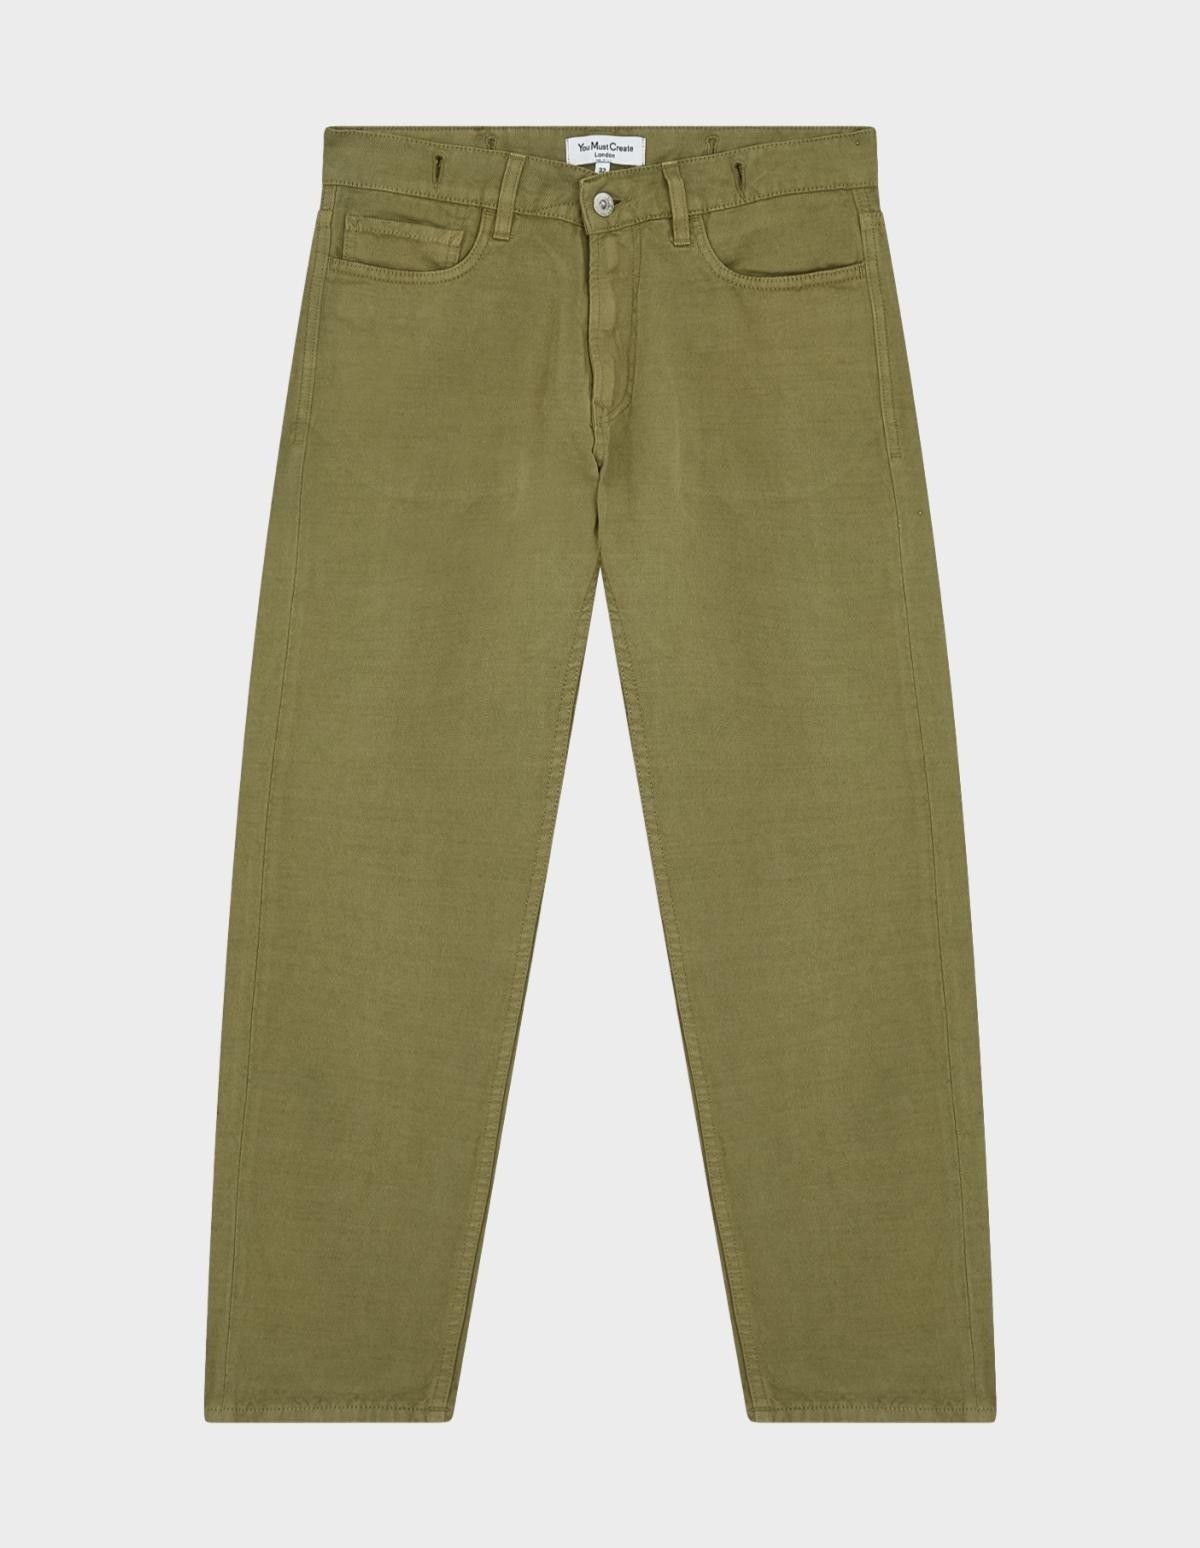 YMC You Must Create Tearaway Jean in Olive